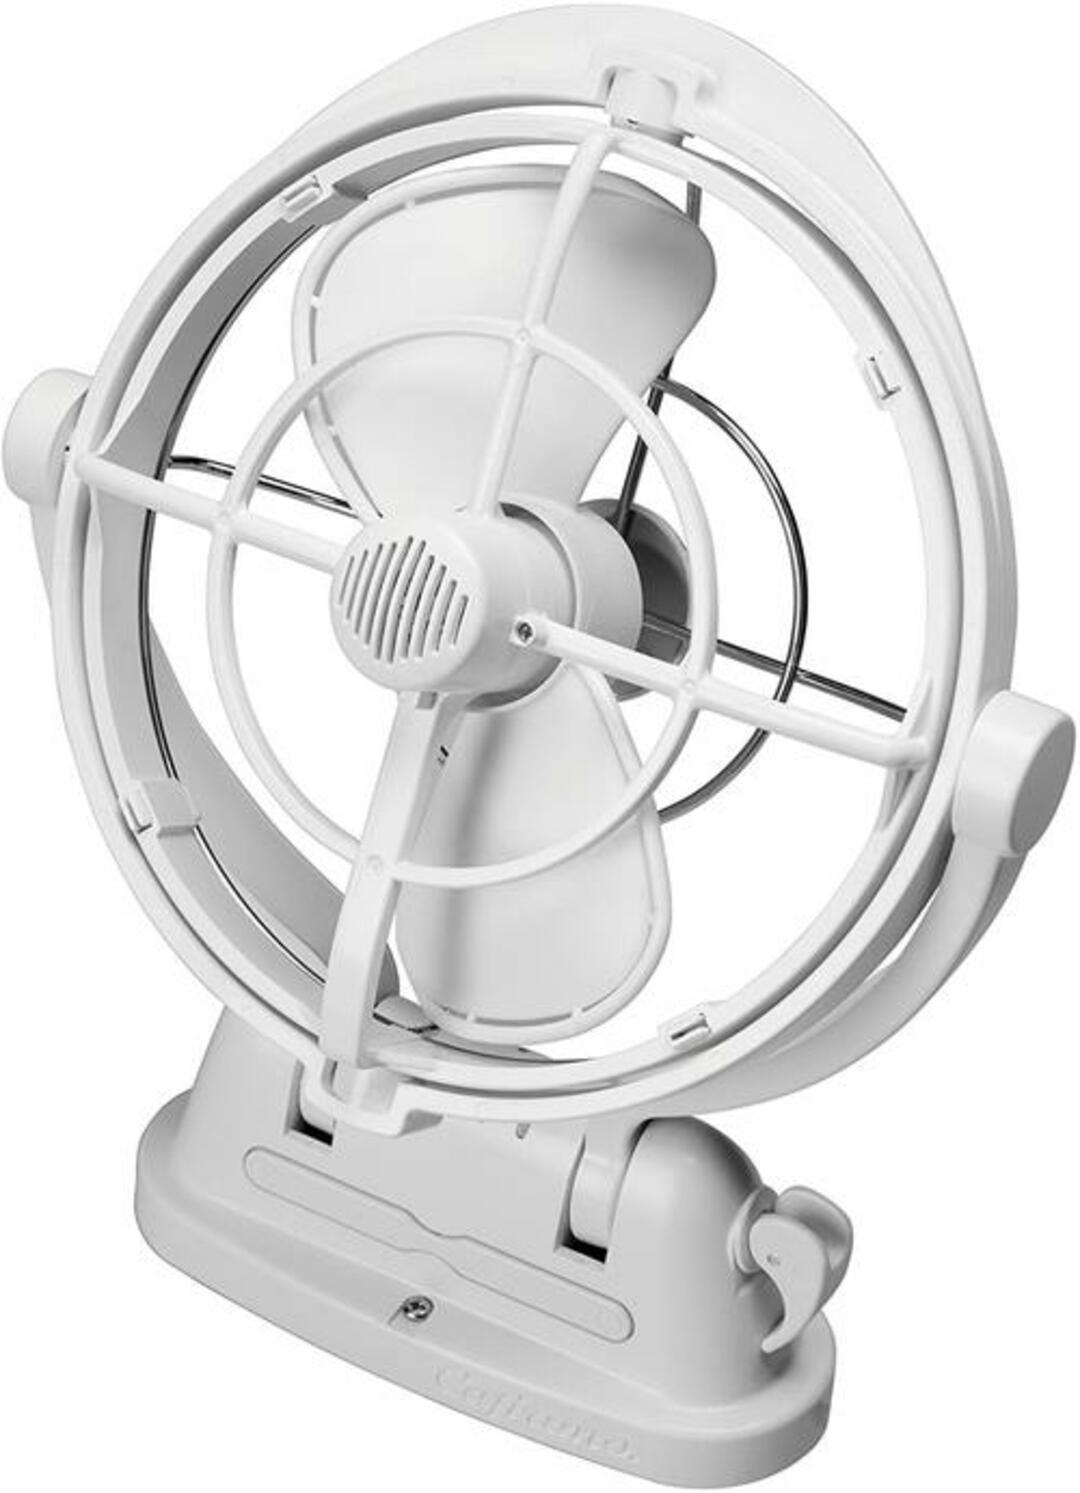 The Sirocco II fan in white, featuring the unique gimballed design that allows for 360° airflow.